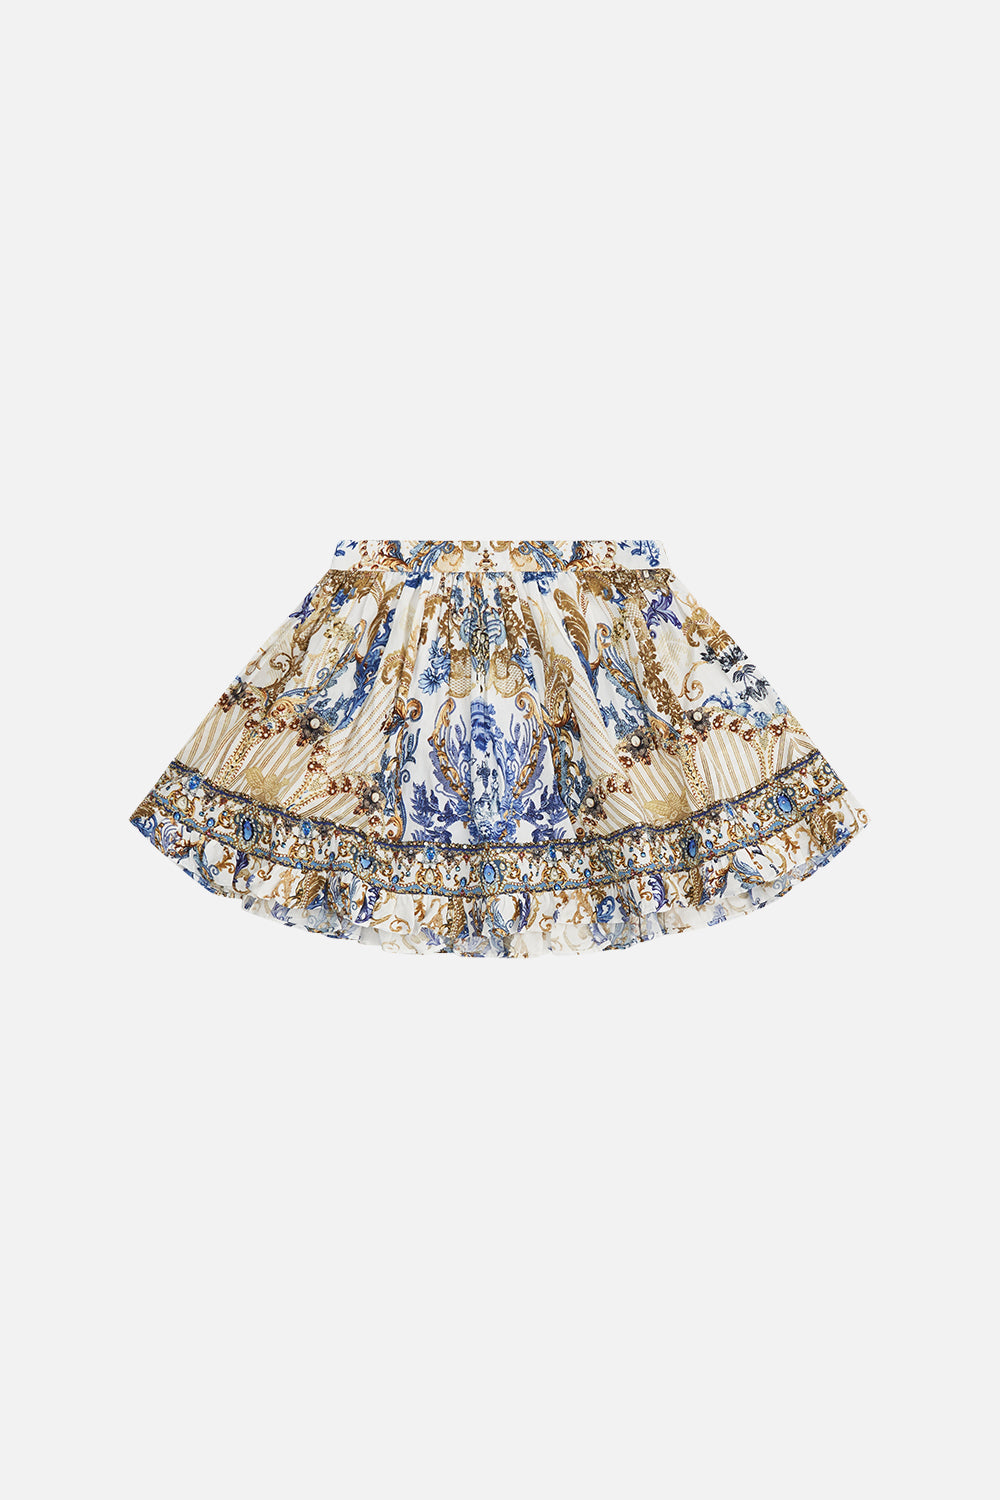 Product view of MILLA By CAMILLA Kids mini skirt in Soul Searching print